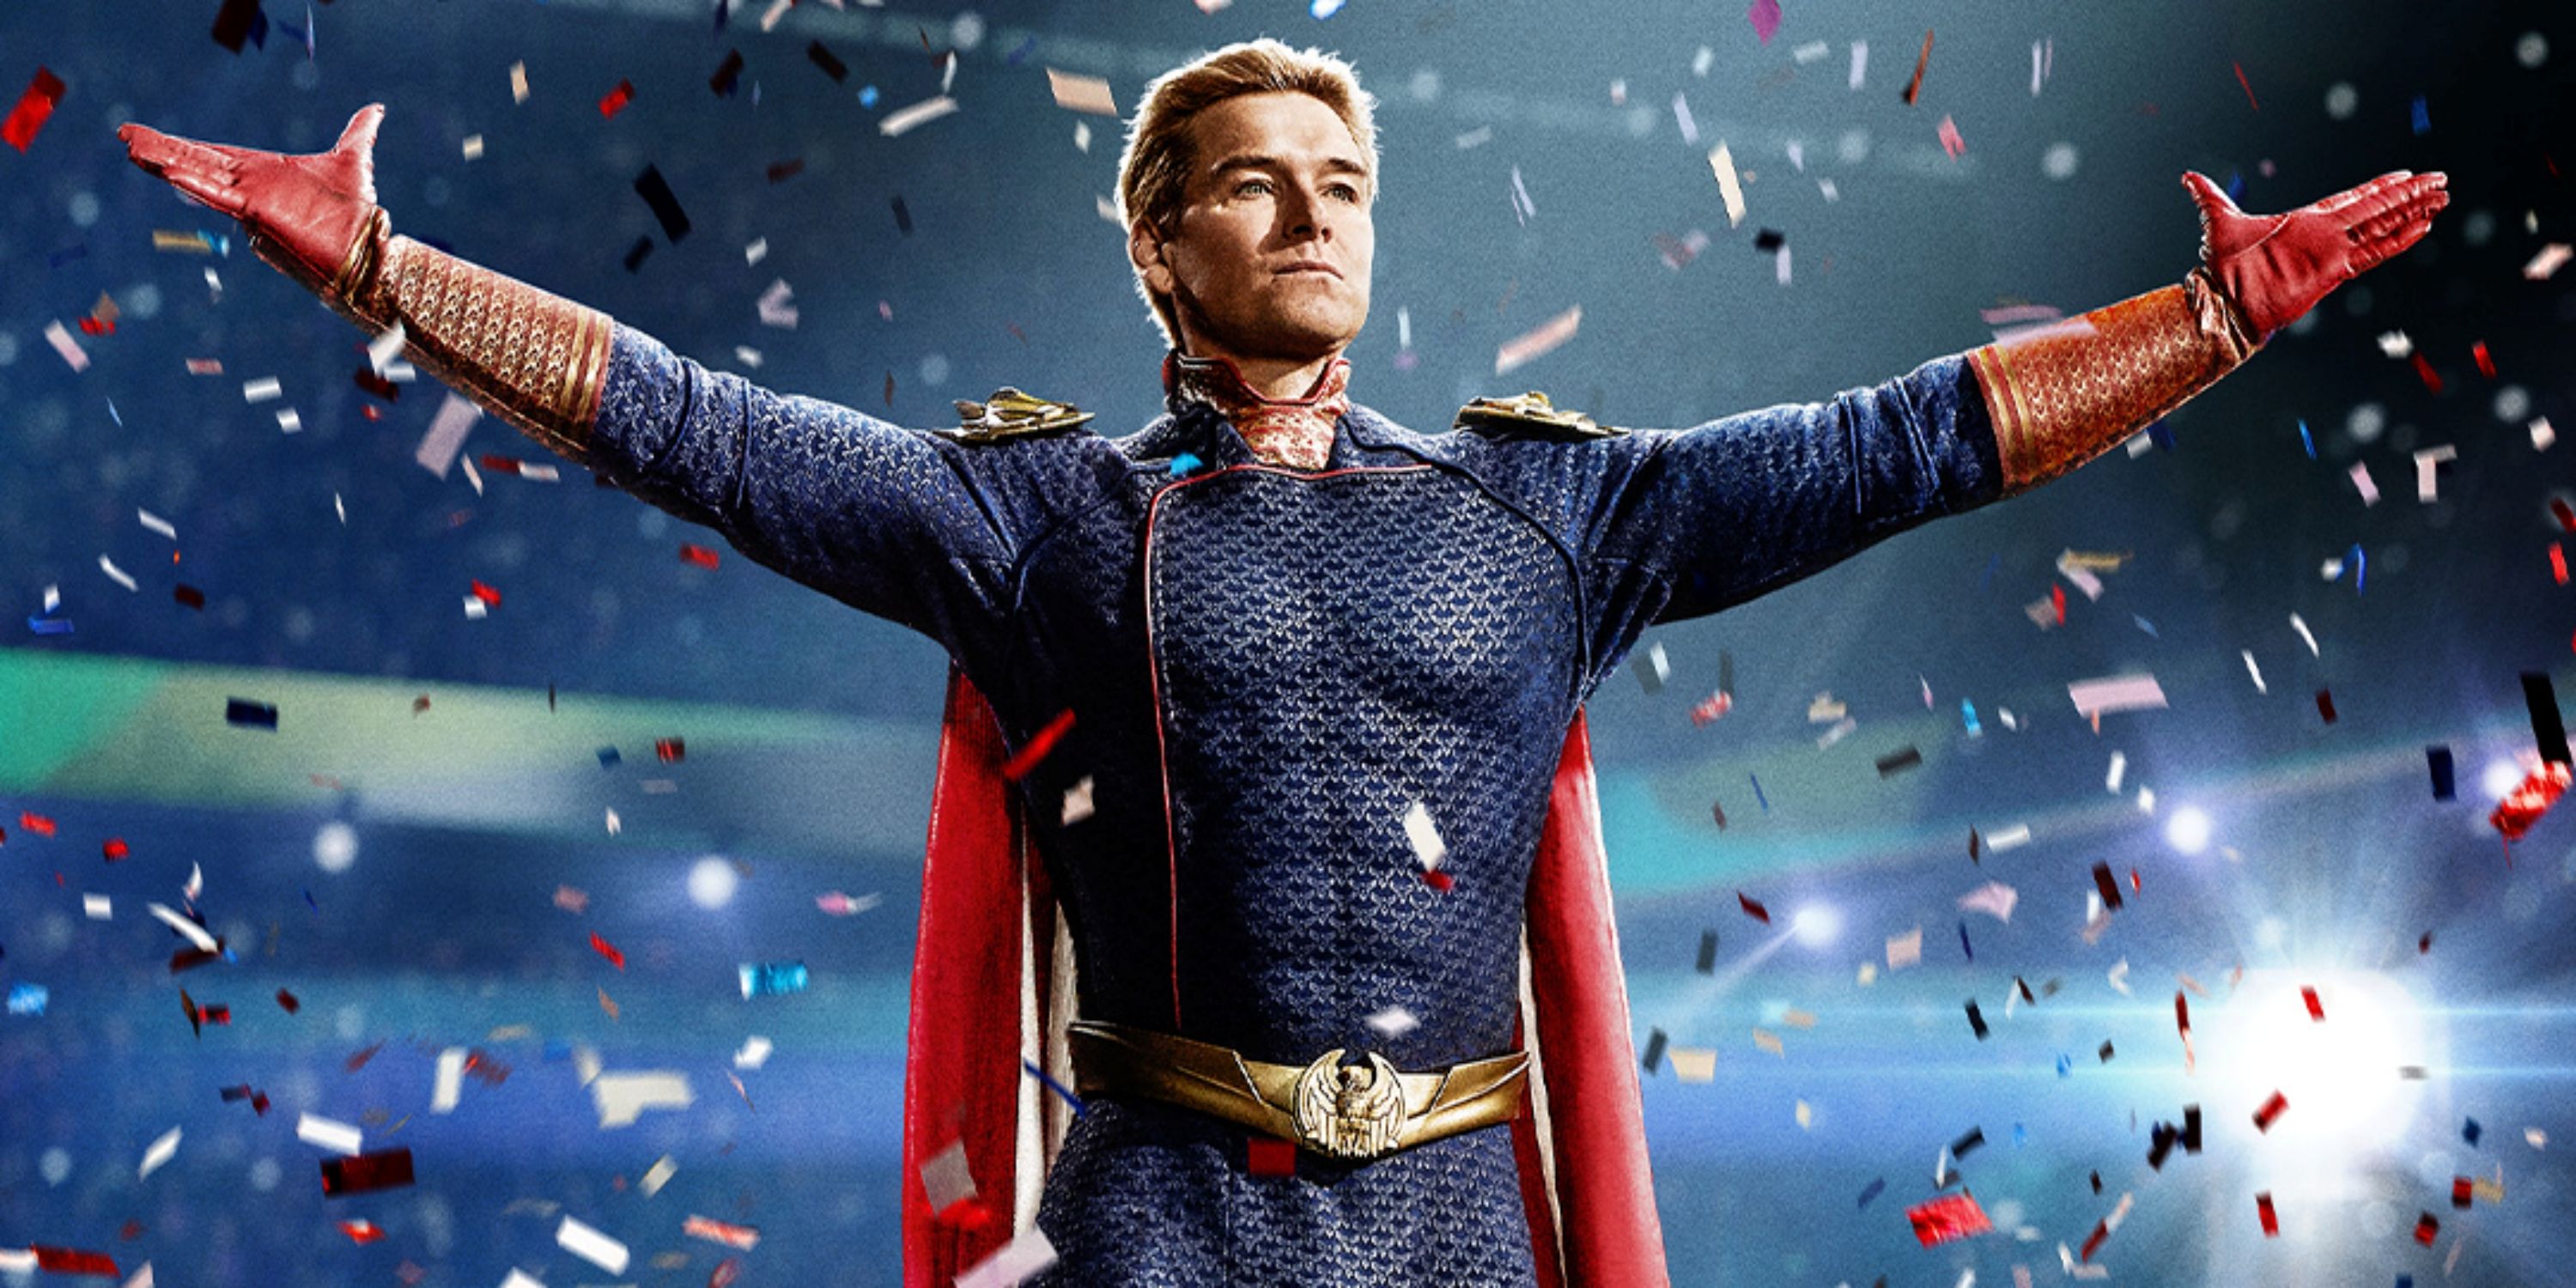 Antony Starr as Homelander with his arm outstretched and confetti falling down in Season 4 of The Boys